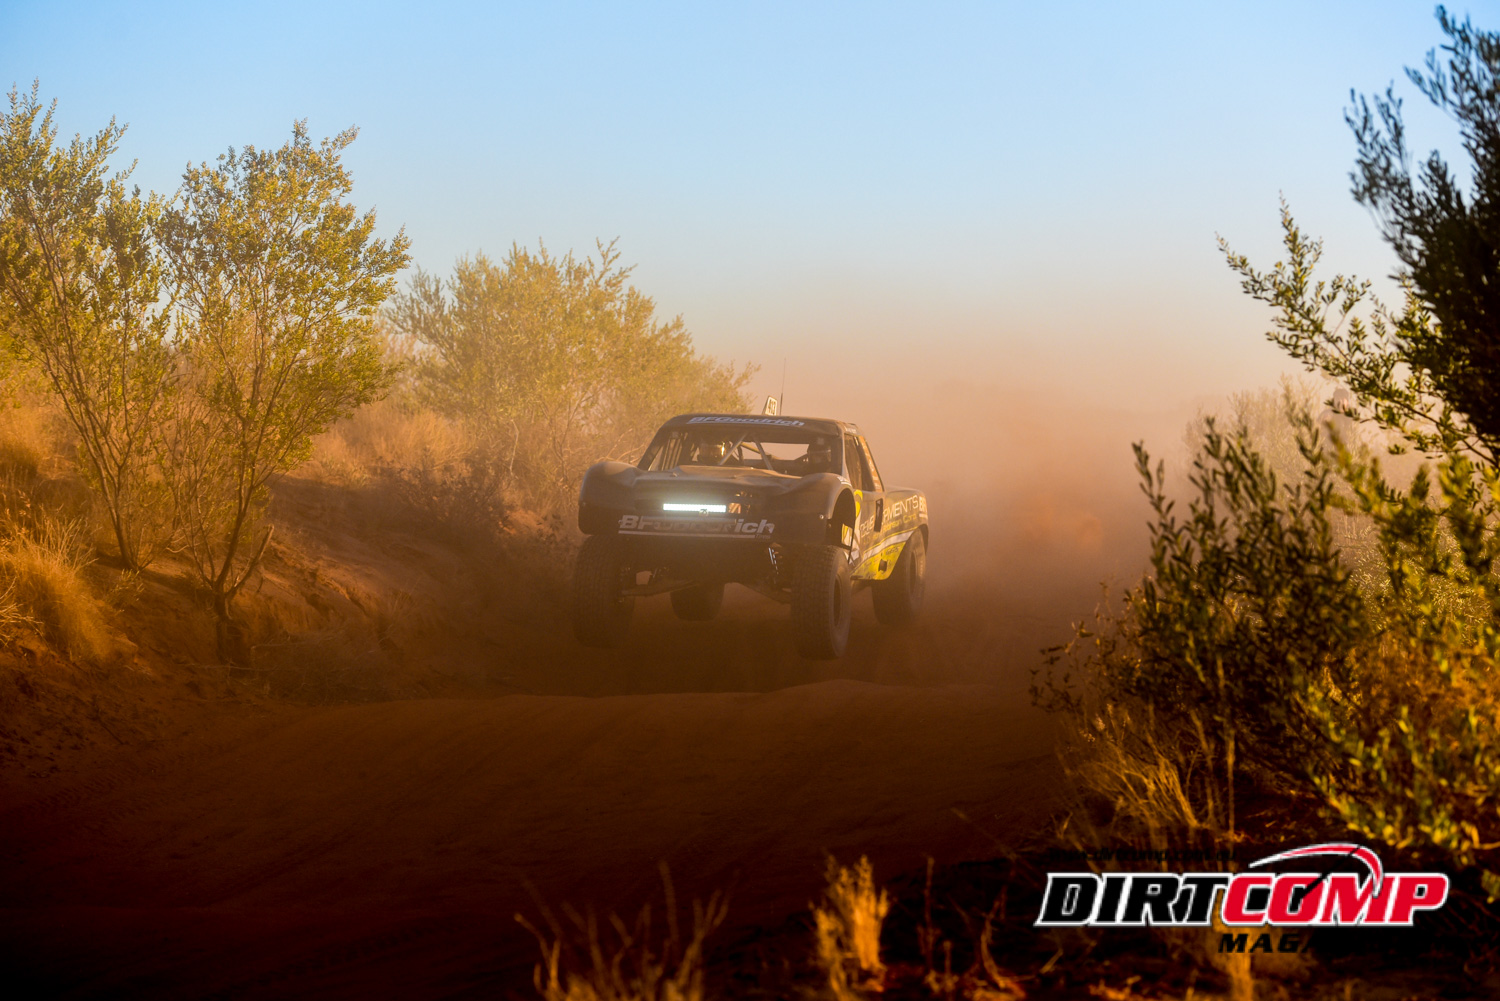 Robinson and Hutt charged their way into third in the #413 OBR Geiser Bros Trophy Truck